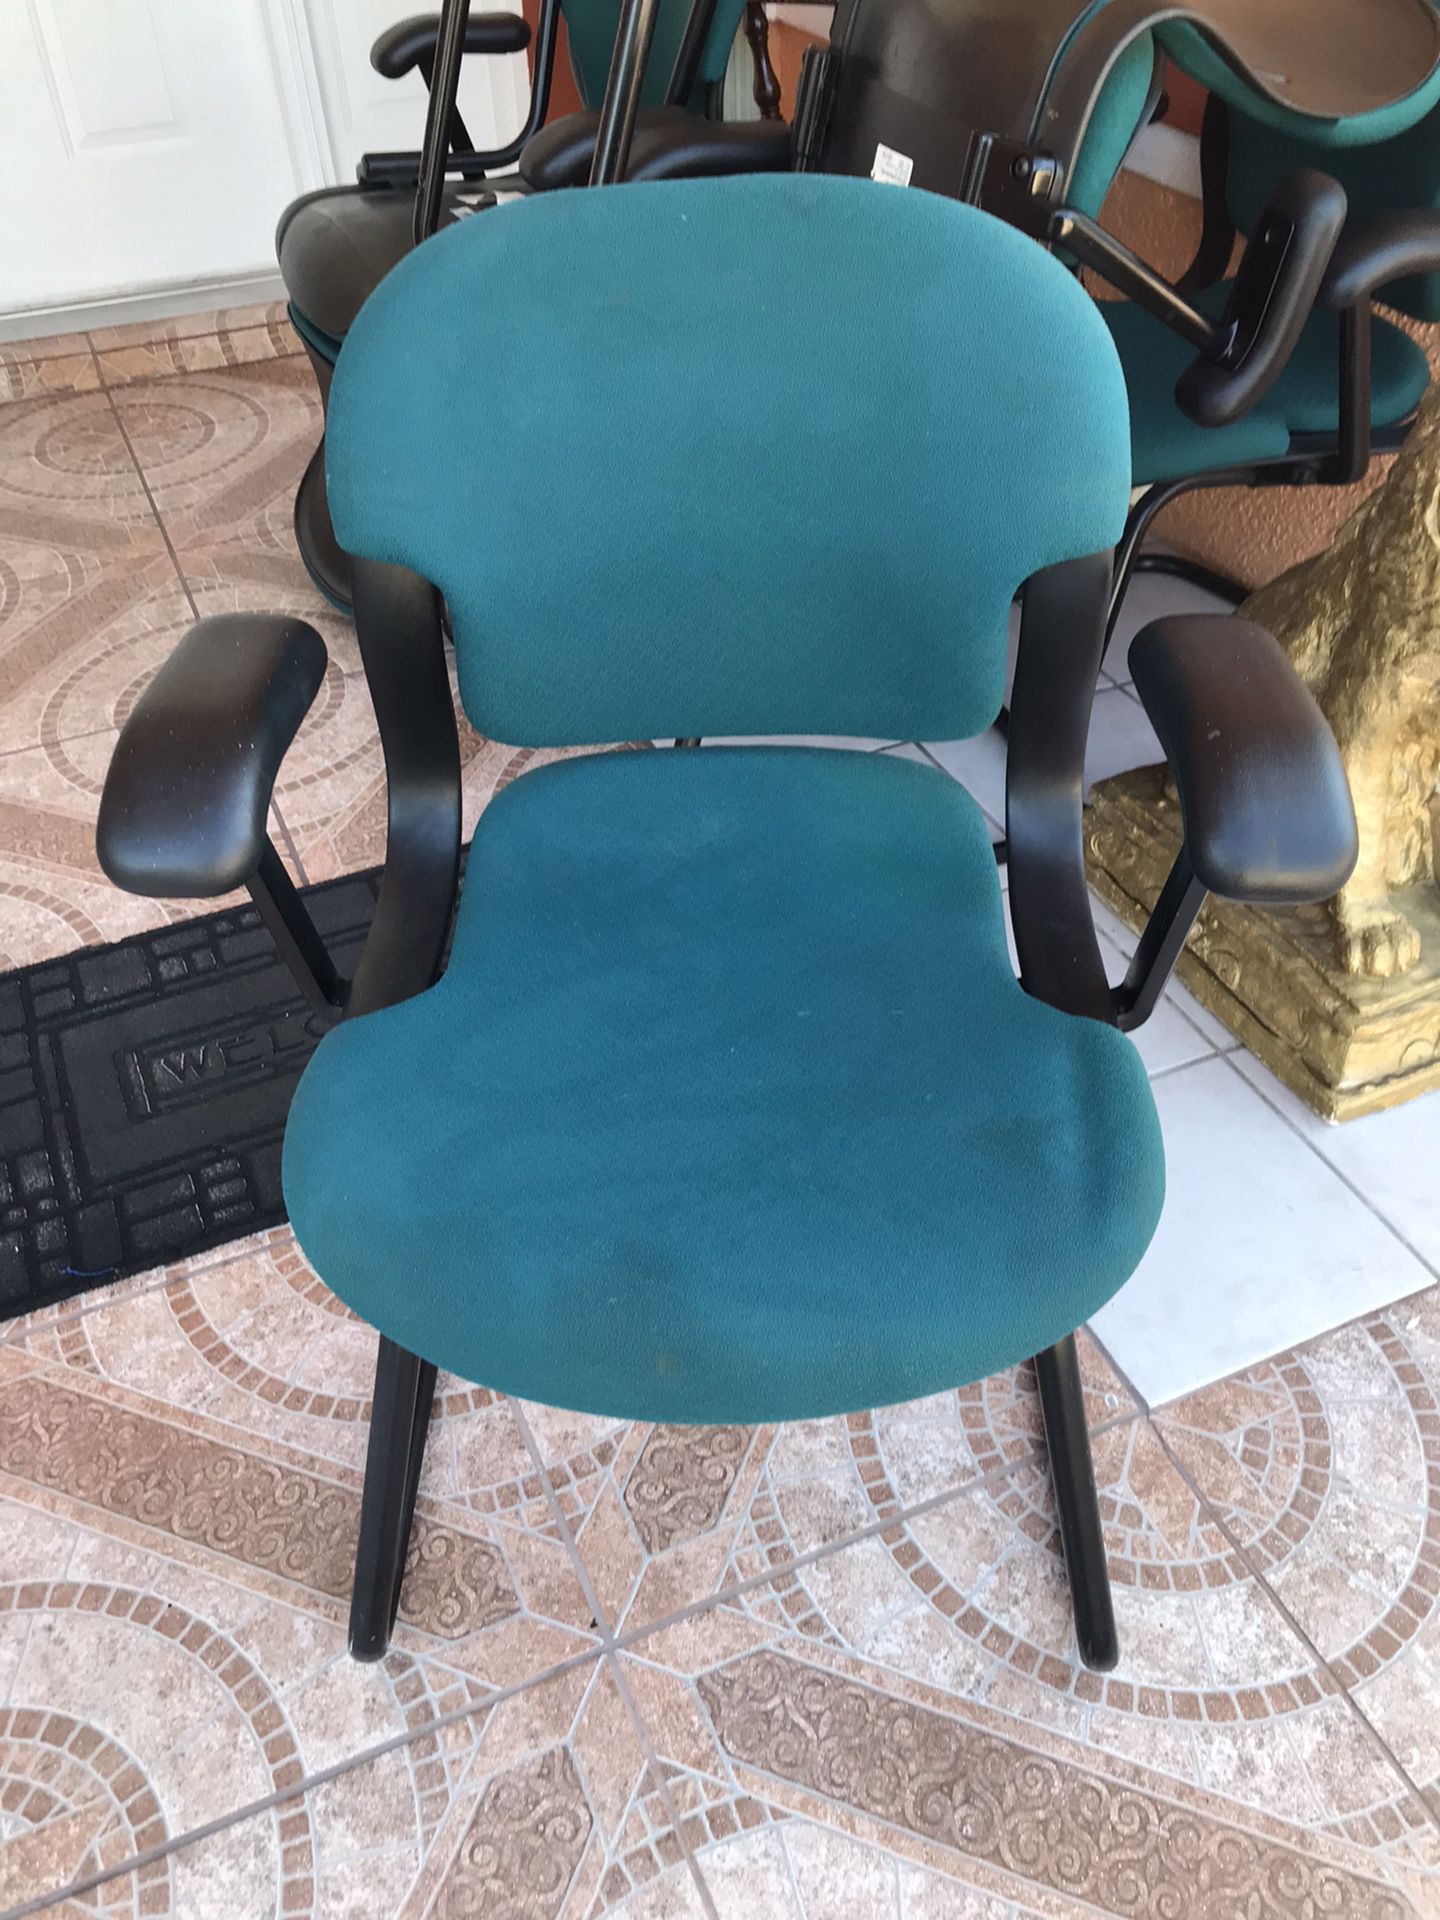 6 equal chairs in good condition very comfortable $ 15 each or $ 60 for the 6 chairs